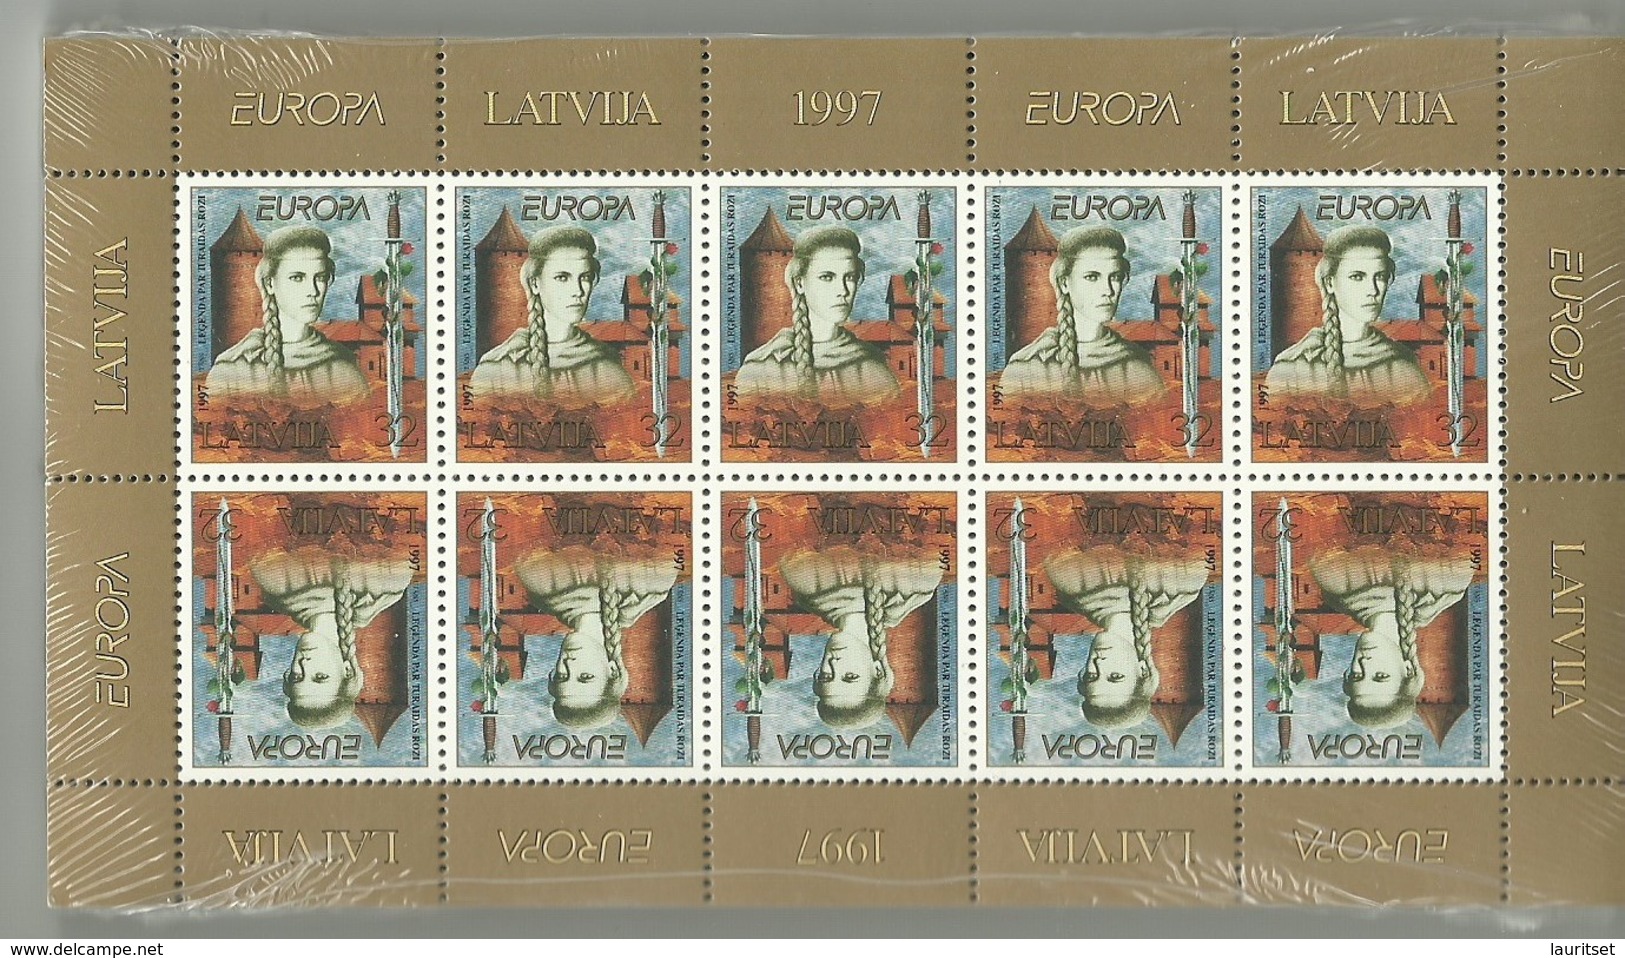 LETTLAND Latvia 1997 Michel 453 = 100 Sheets X 10 Stamps = 1000 Stamps Europa CEPT  MNH - Letland